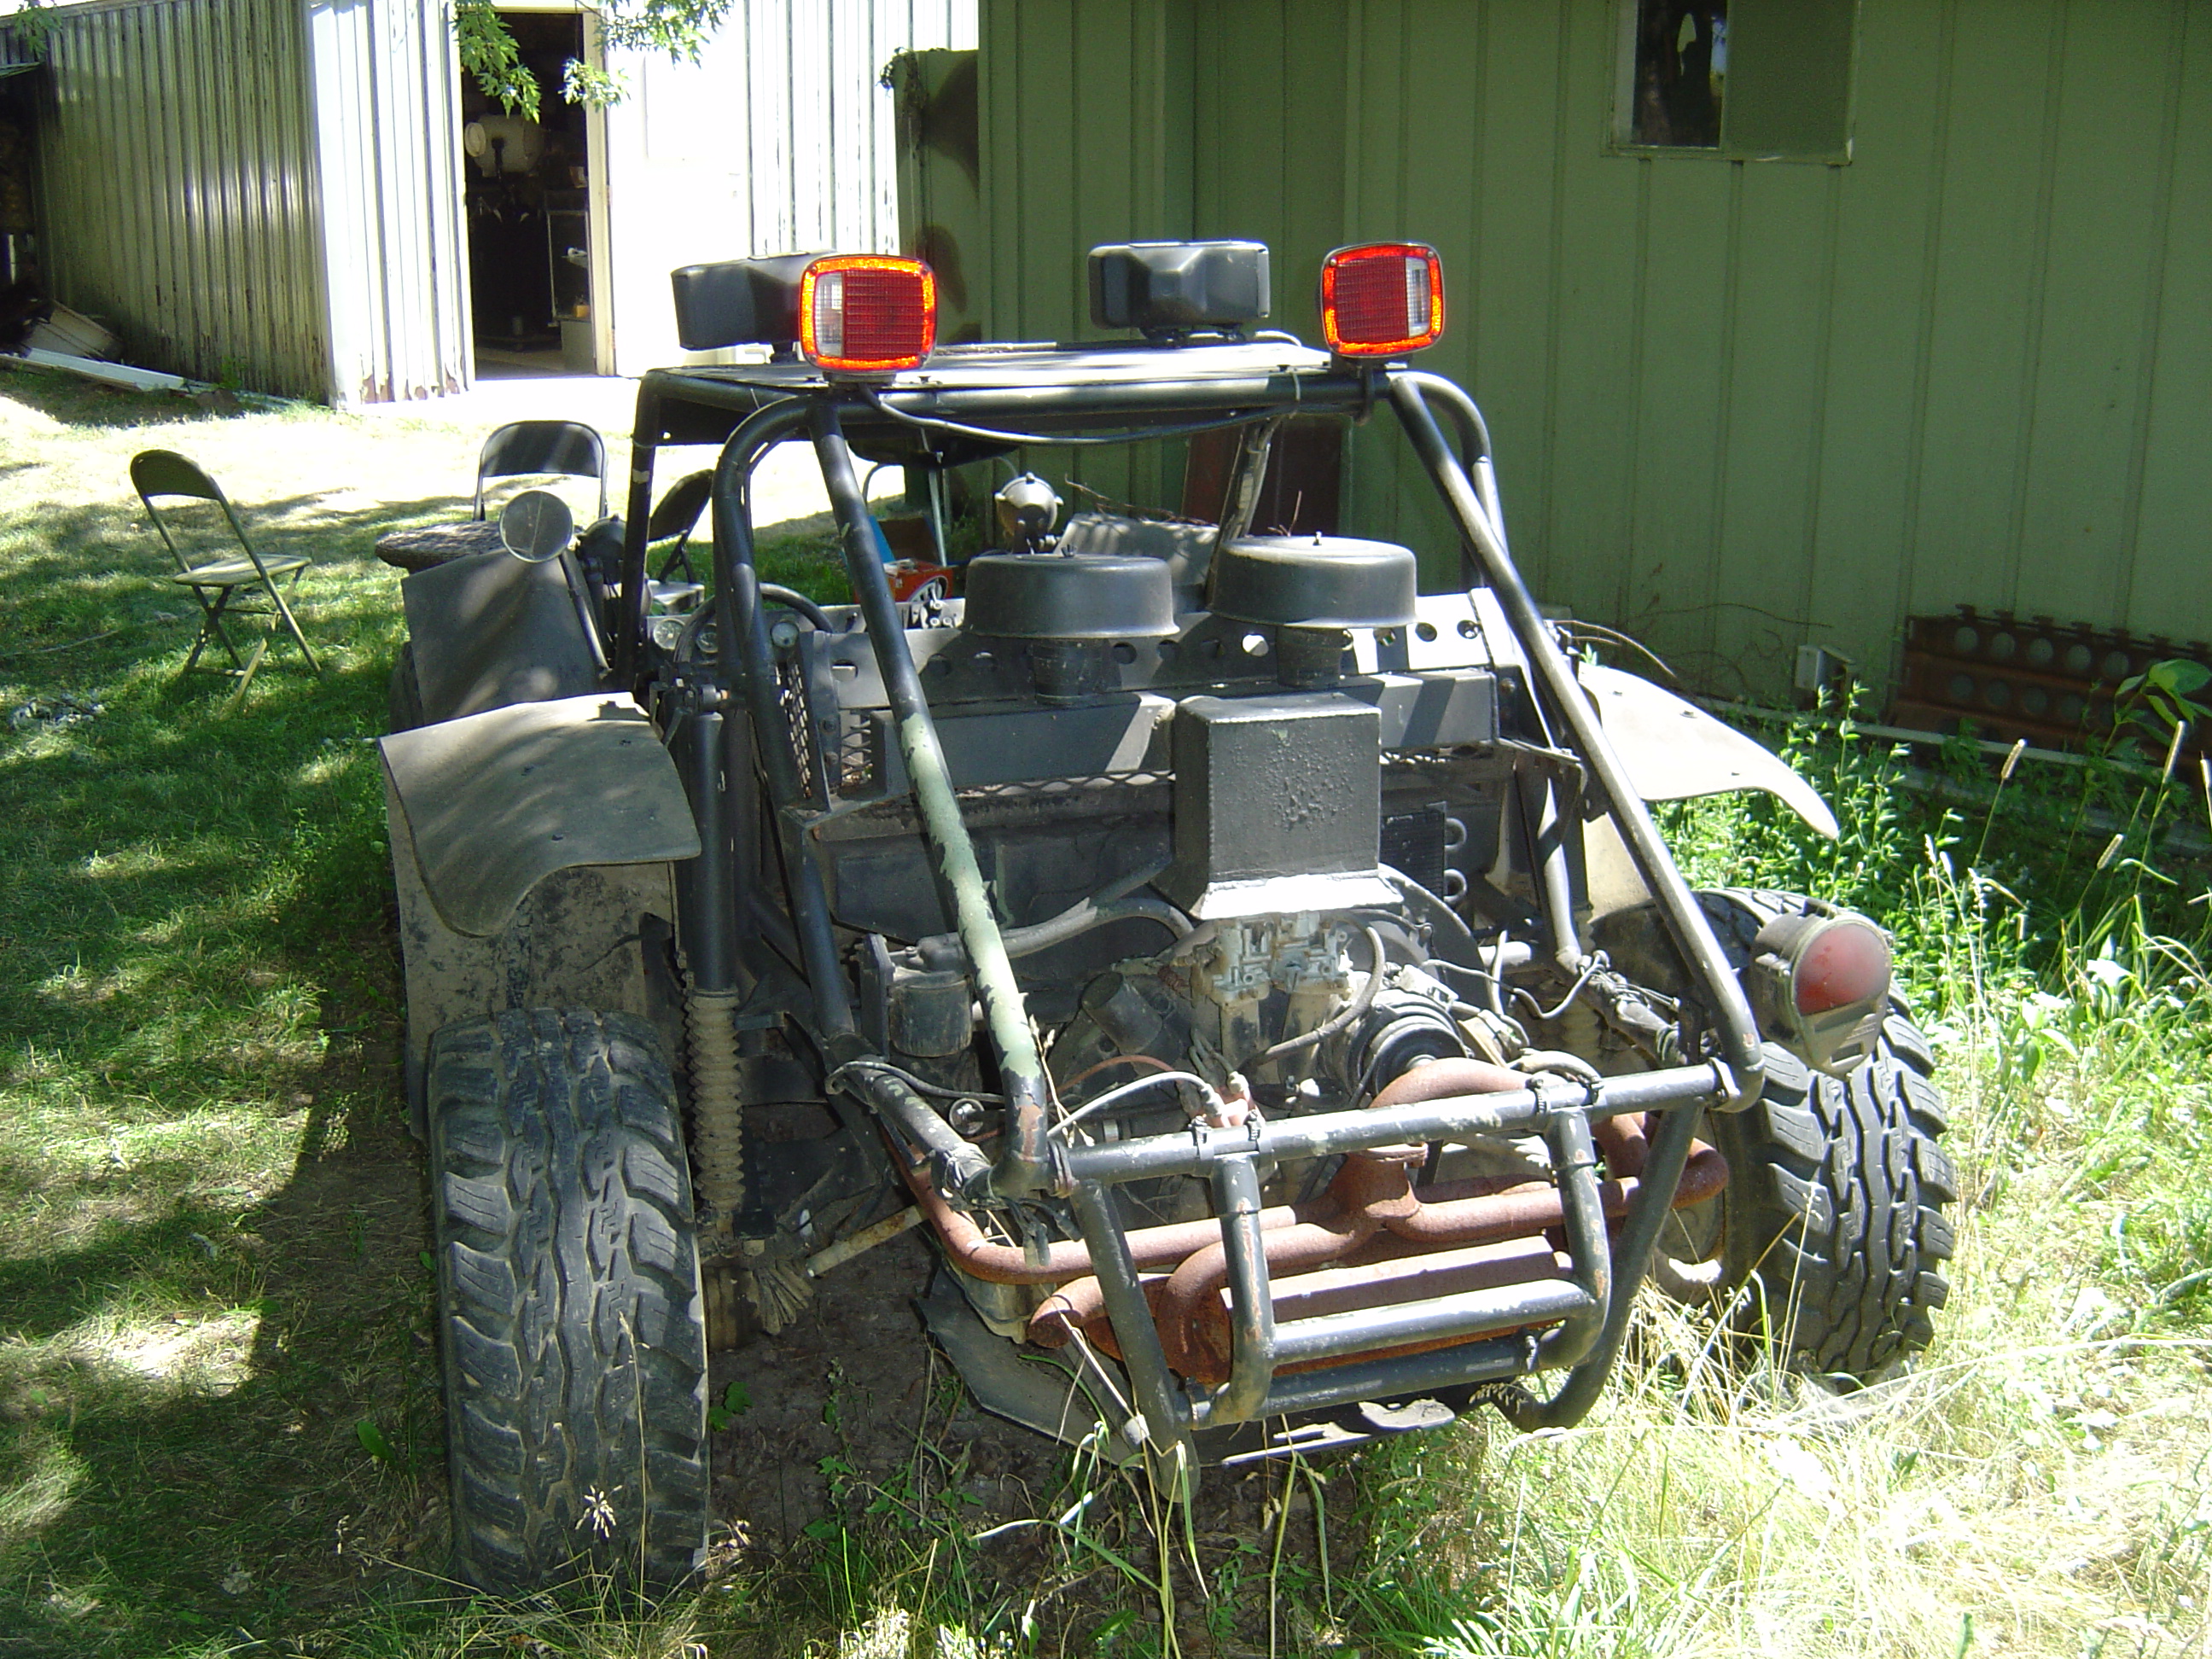 chenowth military dune buggy for sale